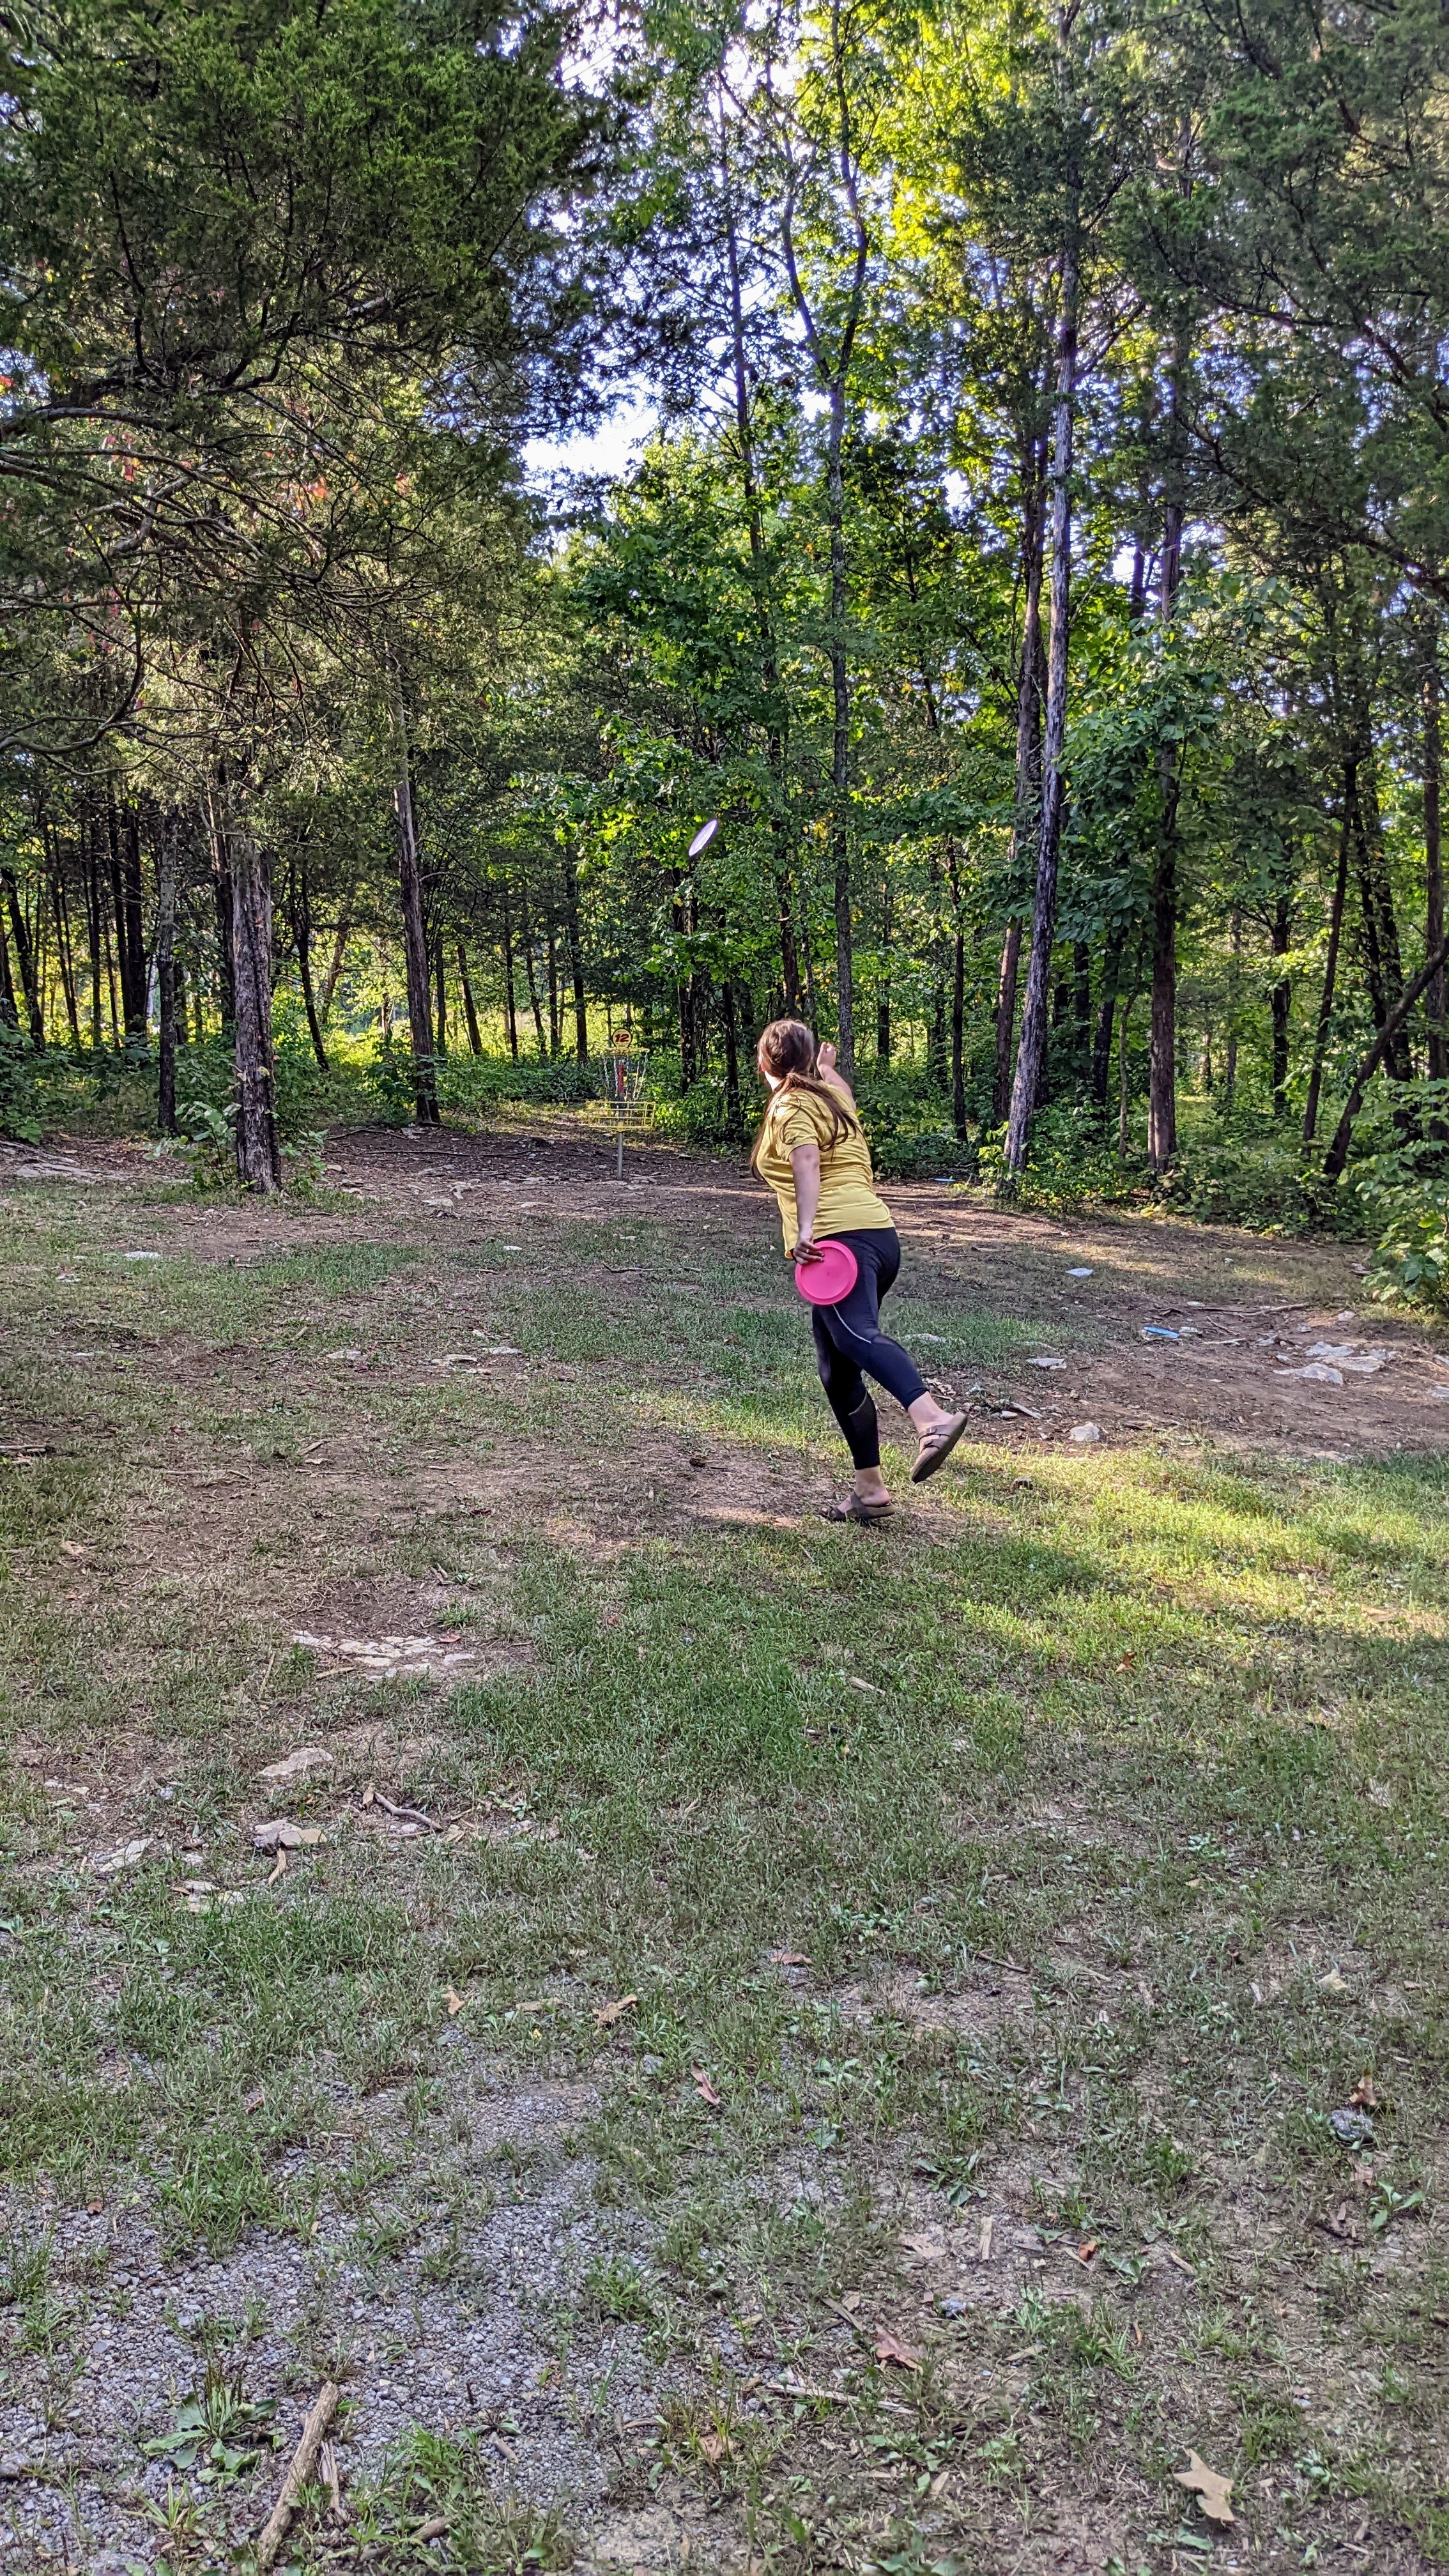 My best Disc Golf game, with my amazing Fiance